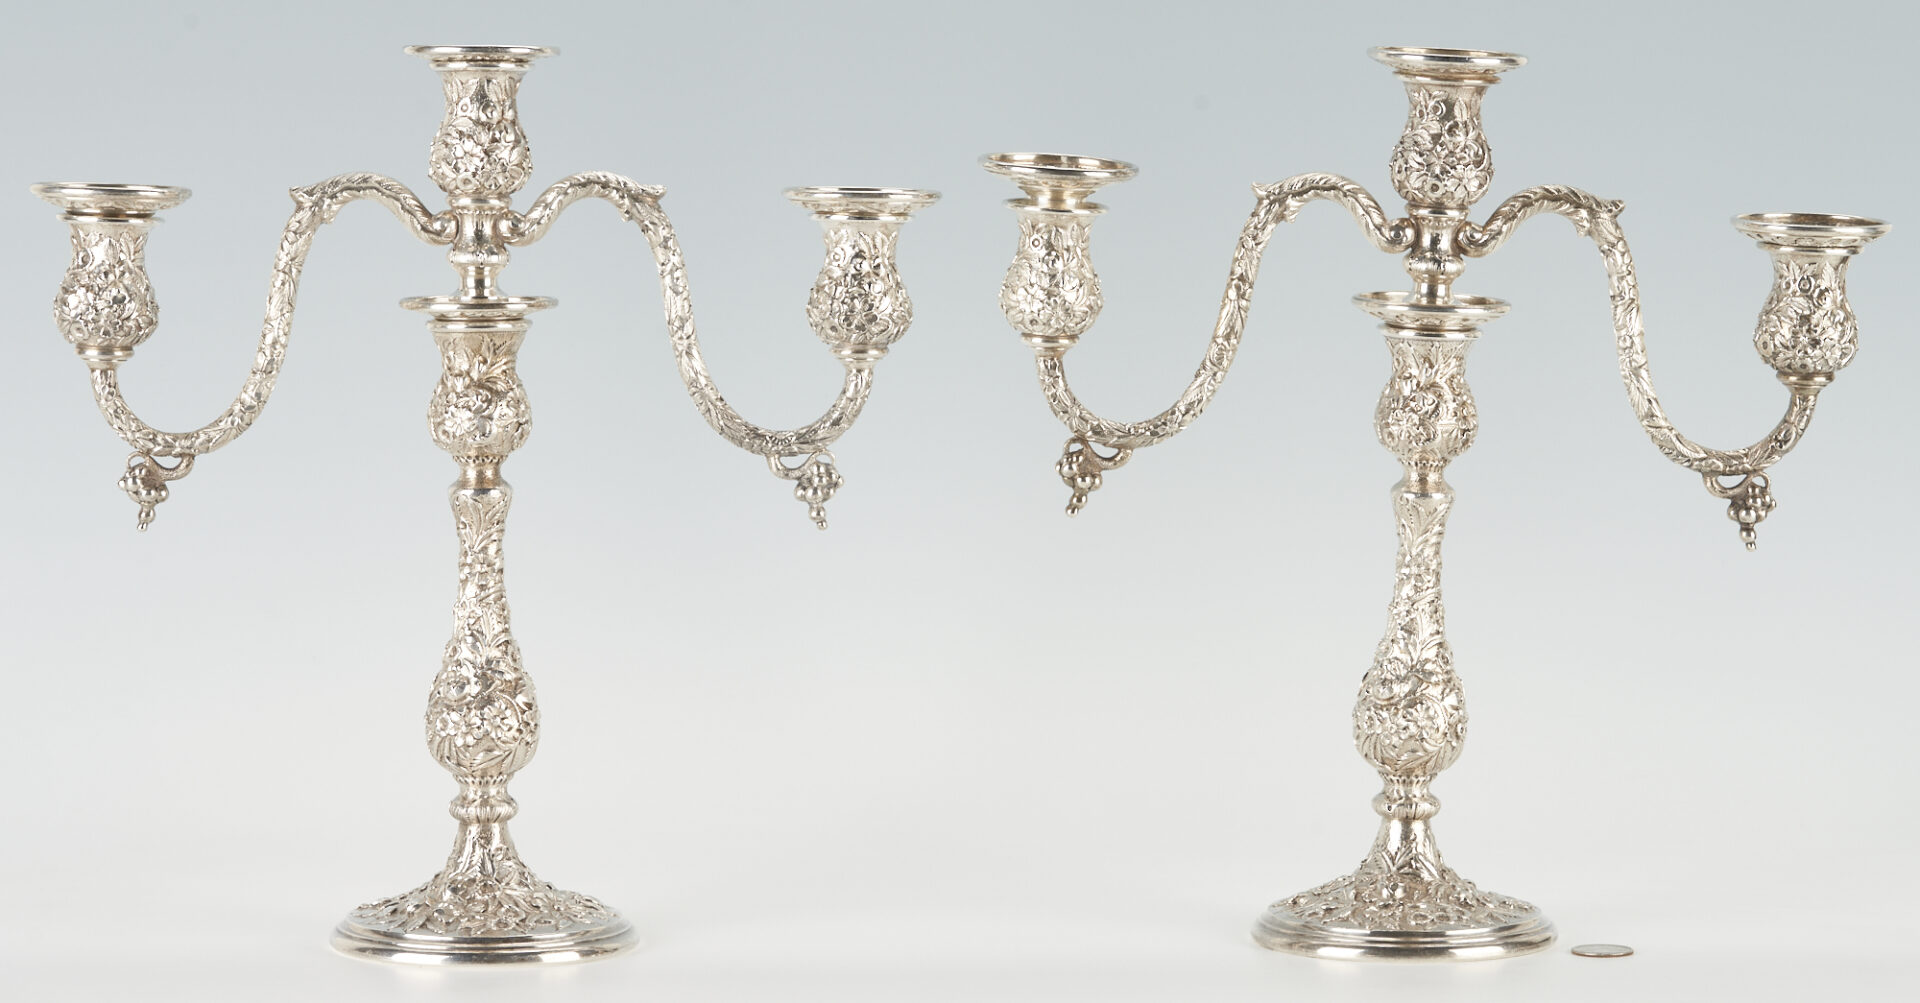 Lot 48: Pair of Tall Kirk Repousse Sterling Convertible Candelabra, Hand Decorated